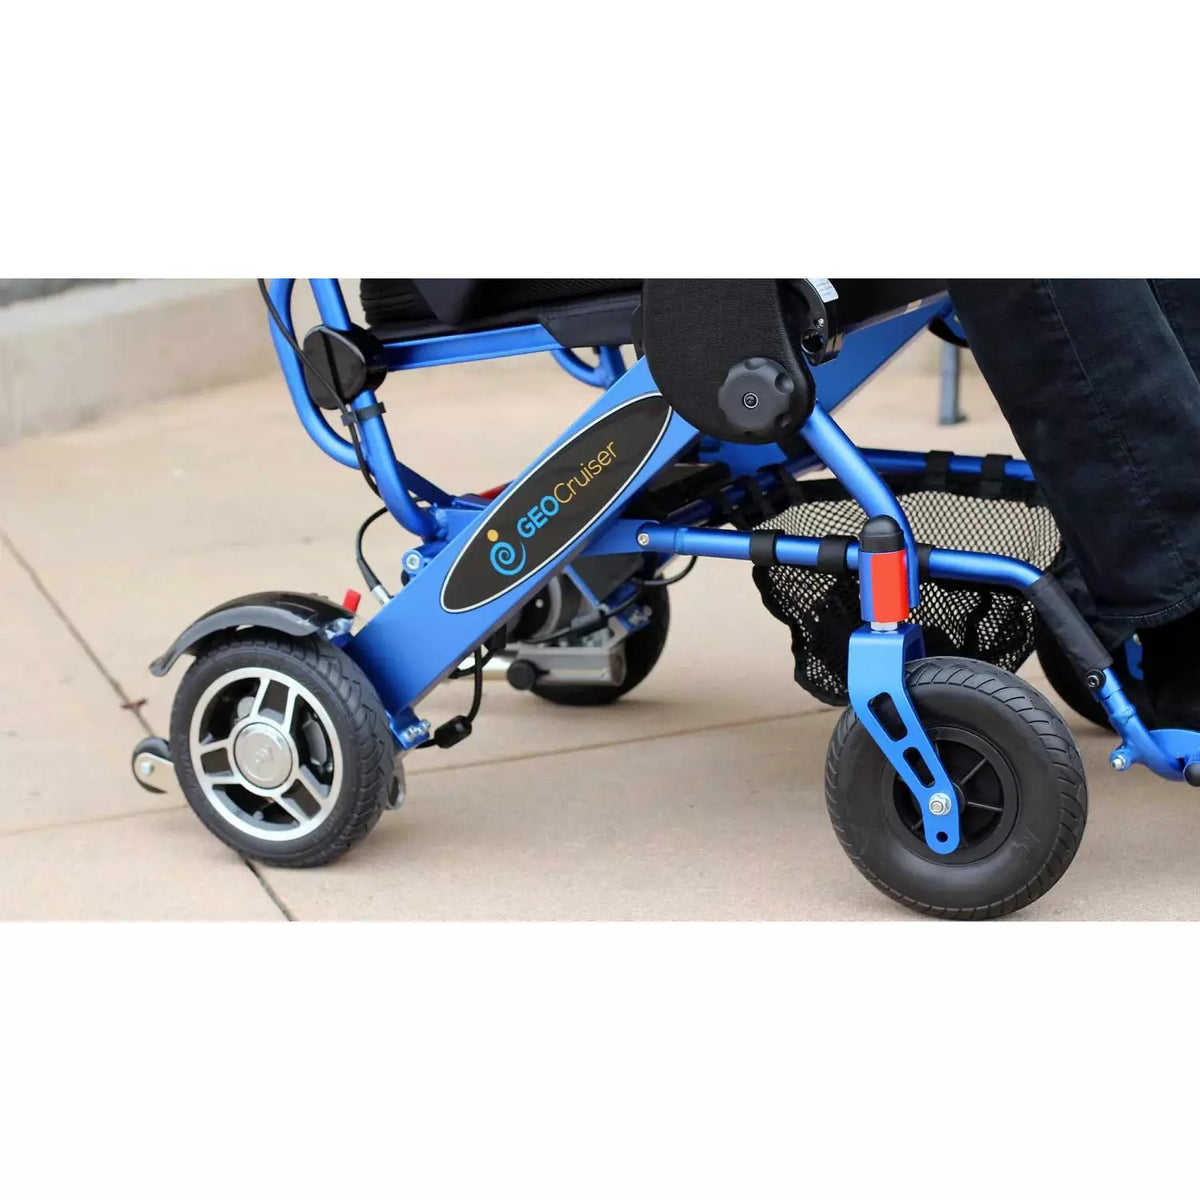 Pathway Mobility Geo Cruiser LX Lightweight Foldable Electric Wheelchair